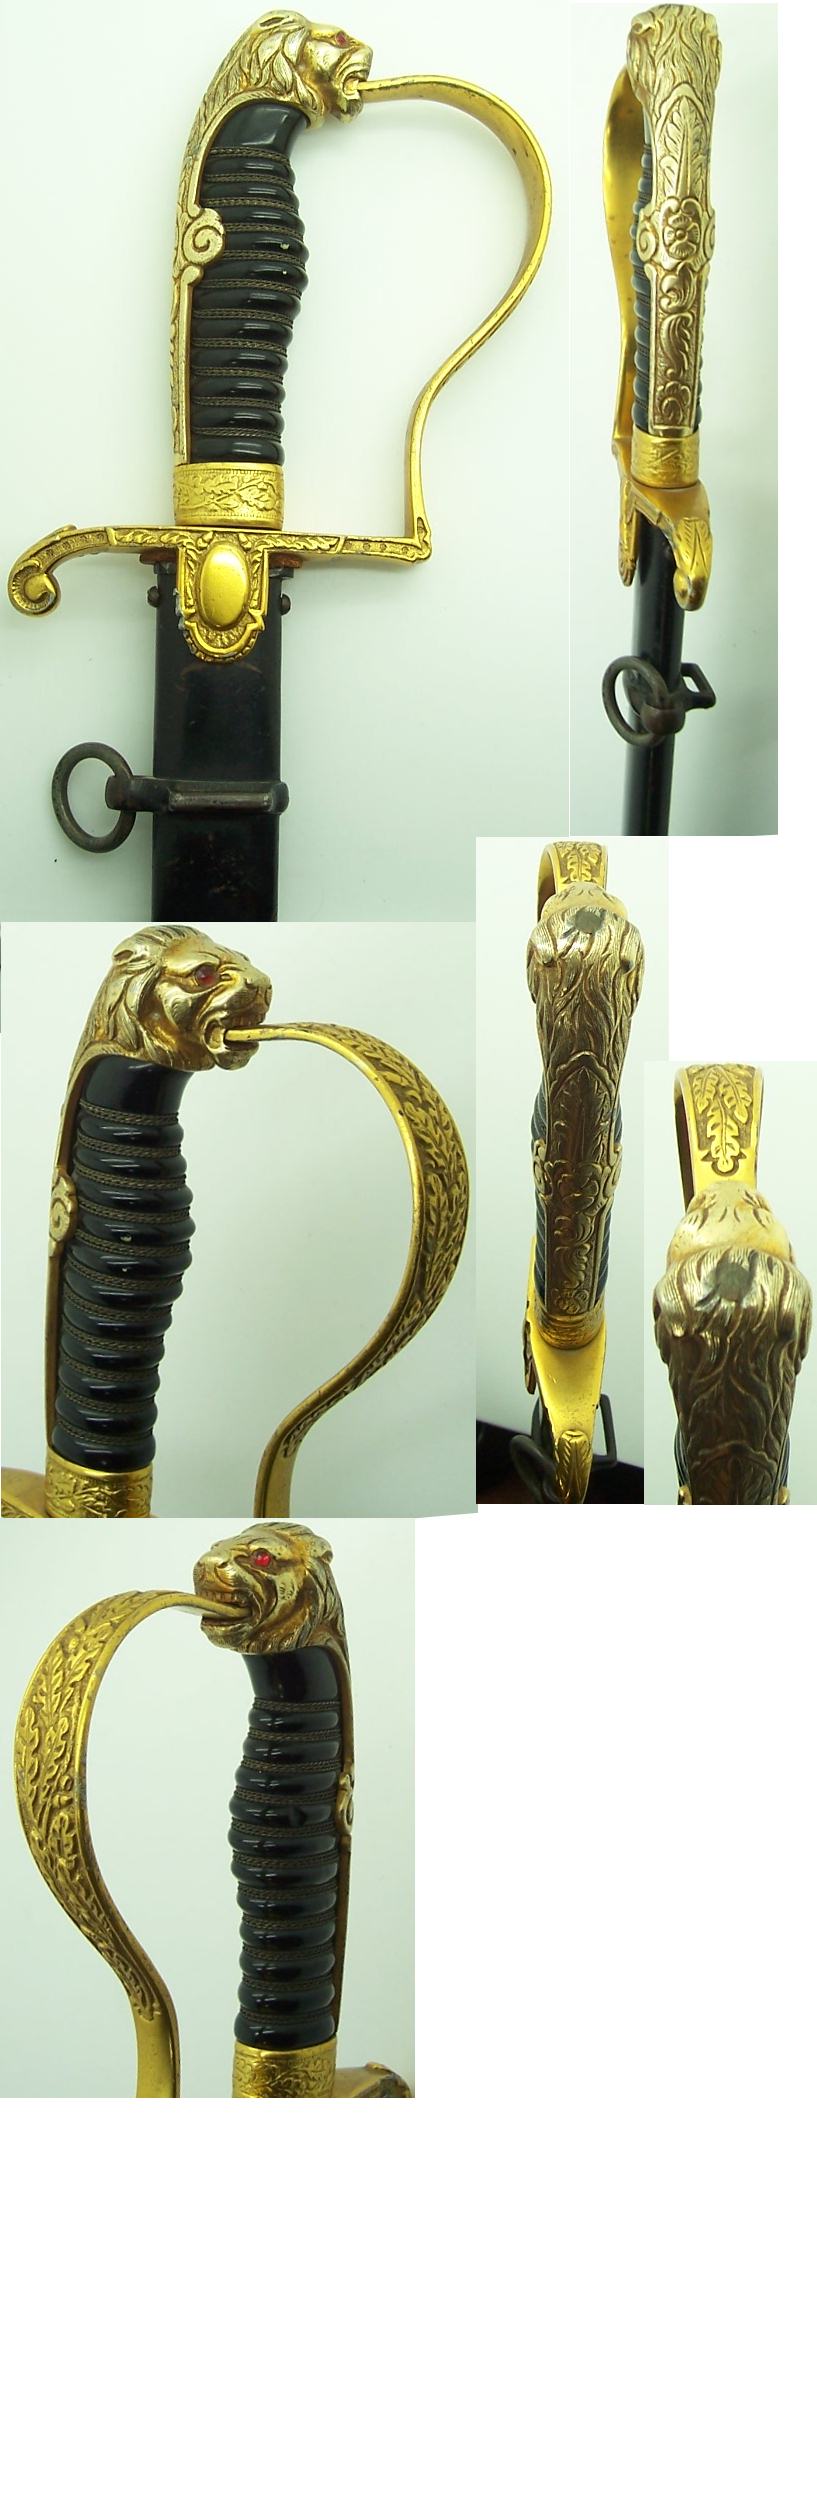 Leopard-head Sword by Horster